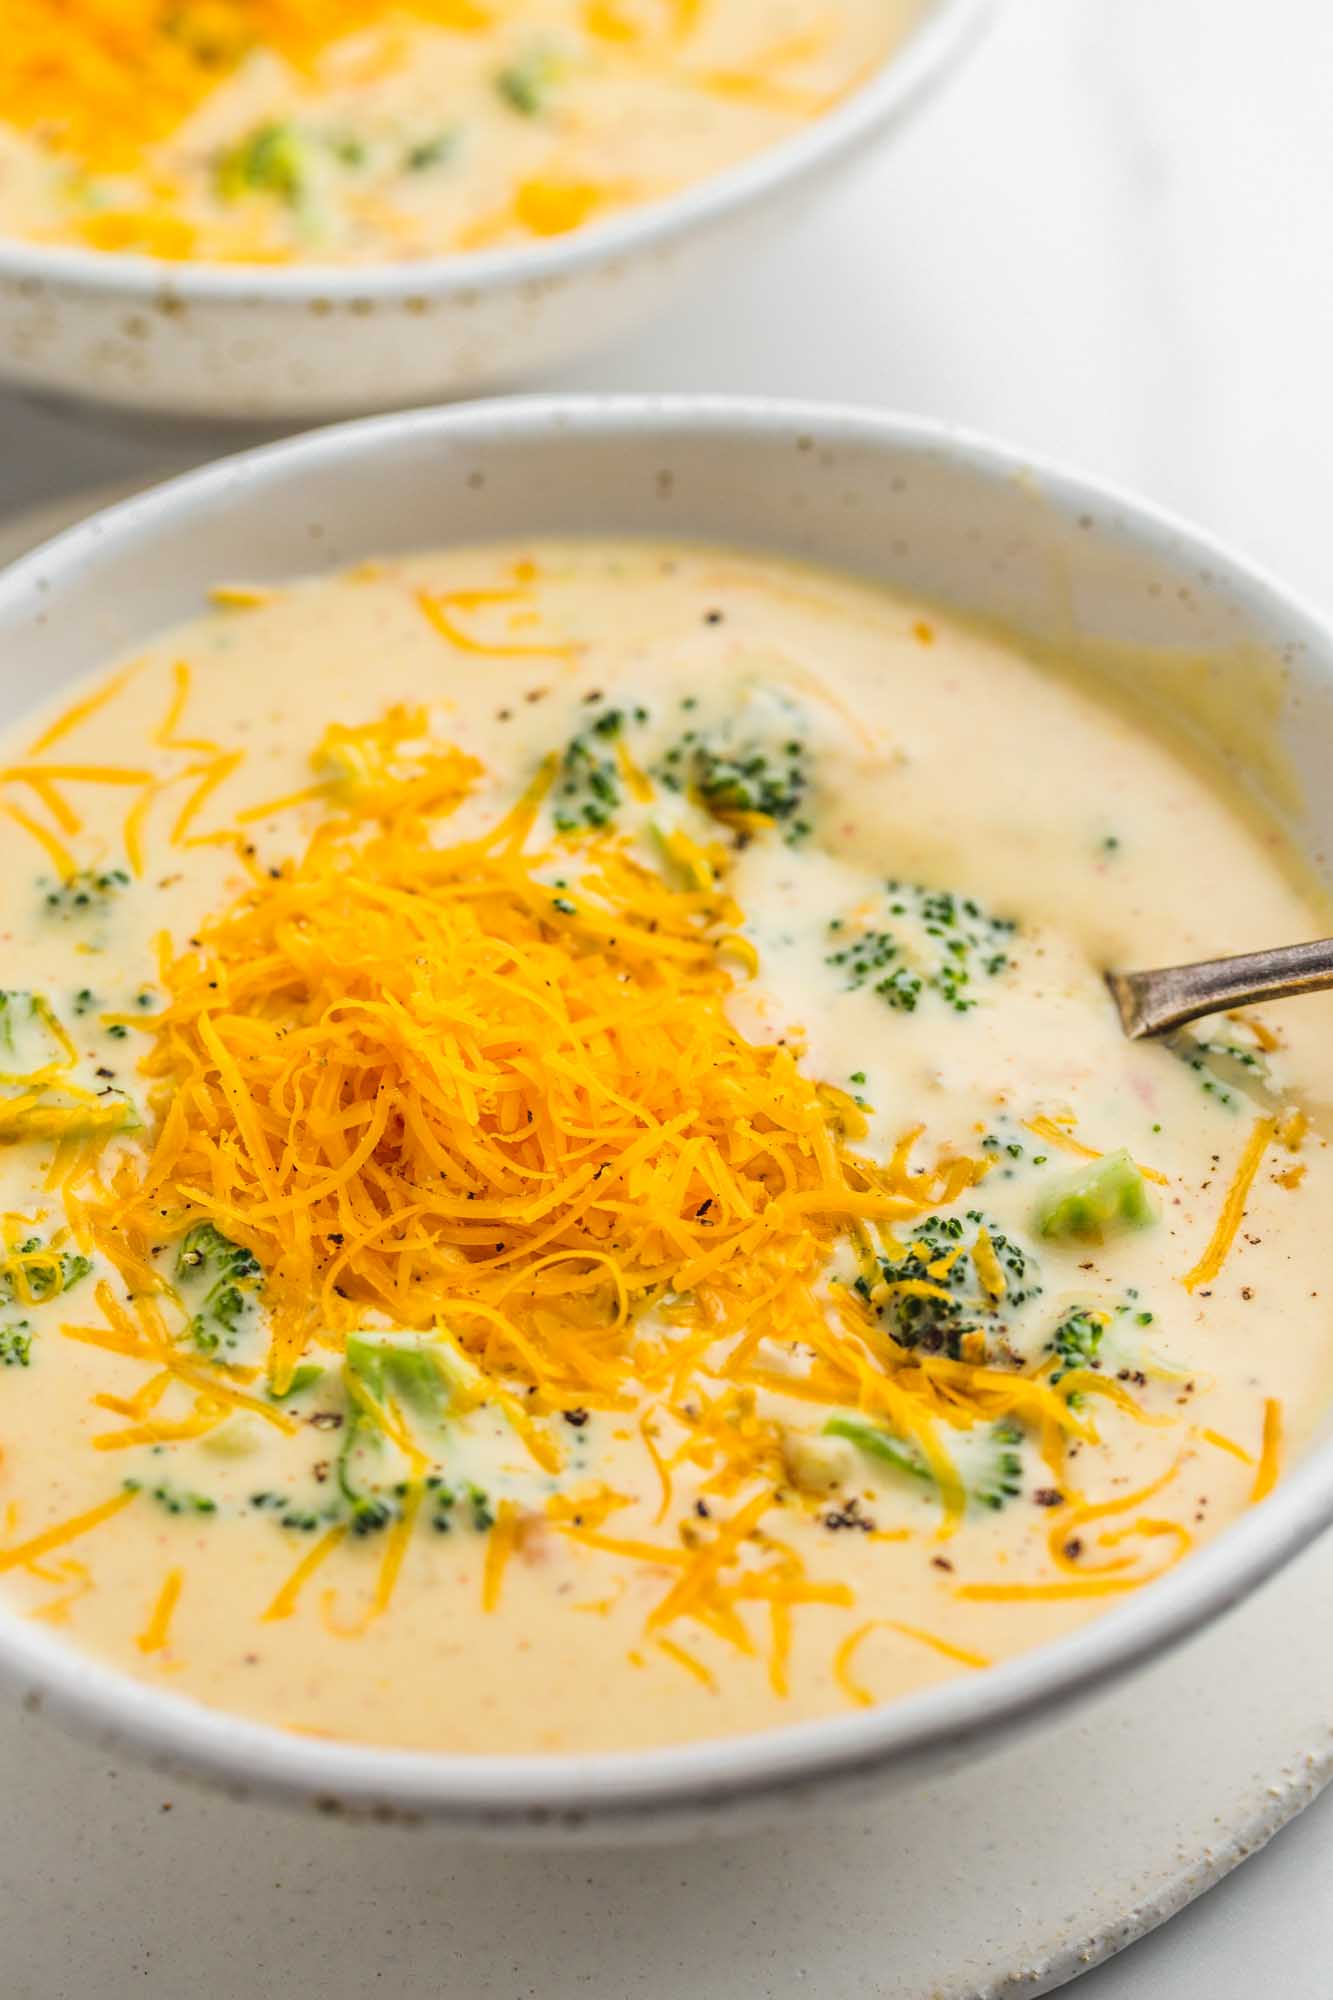 Creamy broccoli cheddar soup served in 2 white bowls with extra sharp cheddar cheese that is grated and added as a topping on the soup